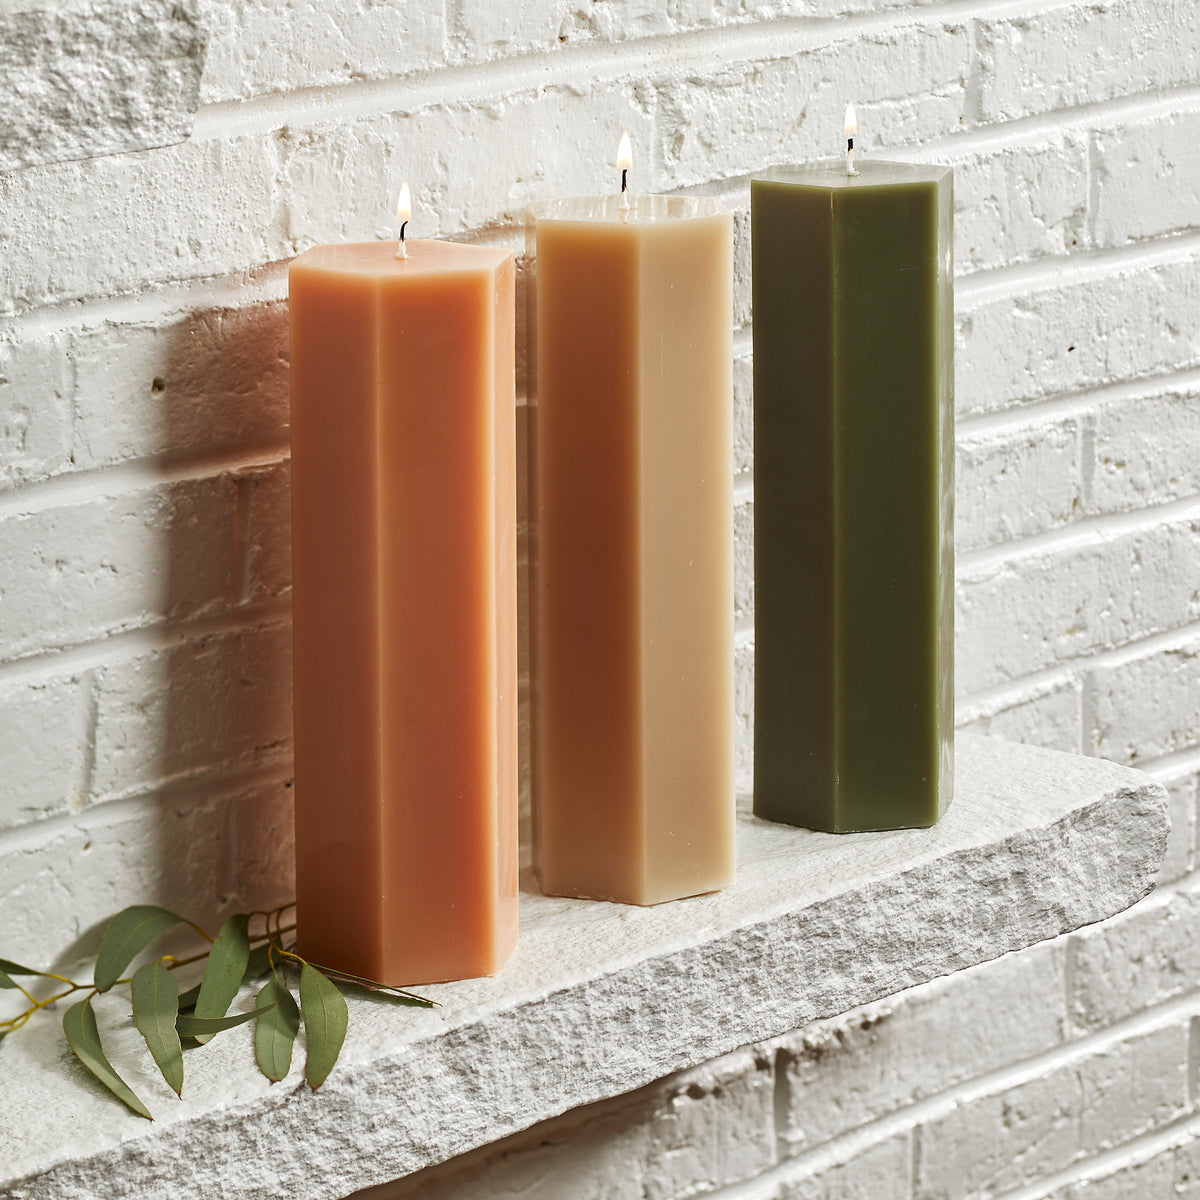 The Hexagonal Pillar Candle in Parchment 9 inch from Caskata is also available in petal pink and moss green.